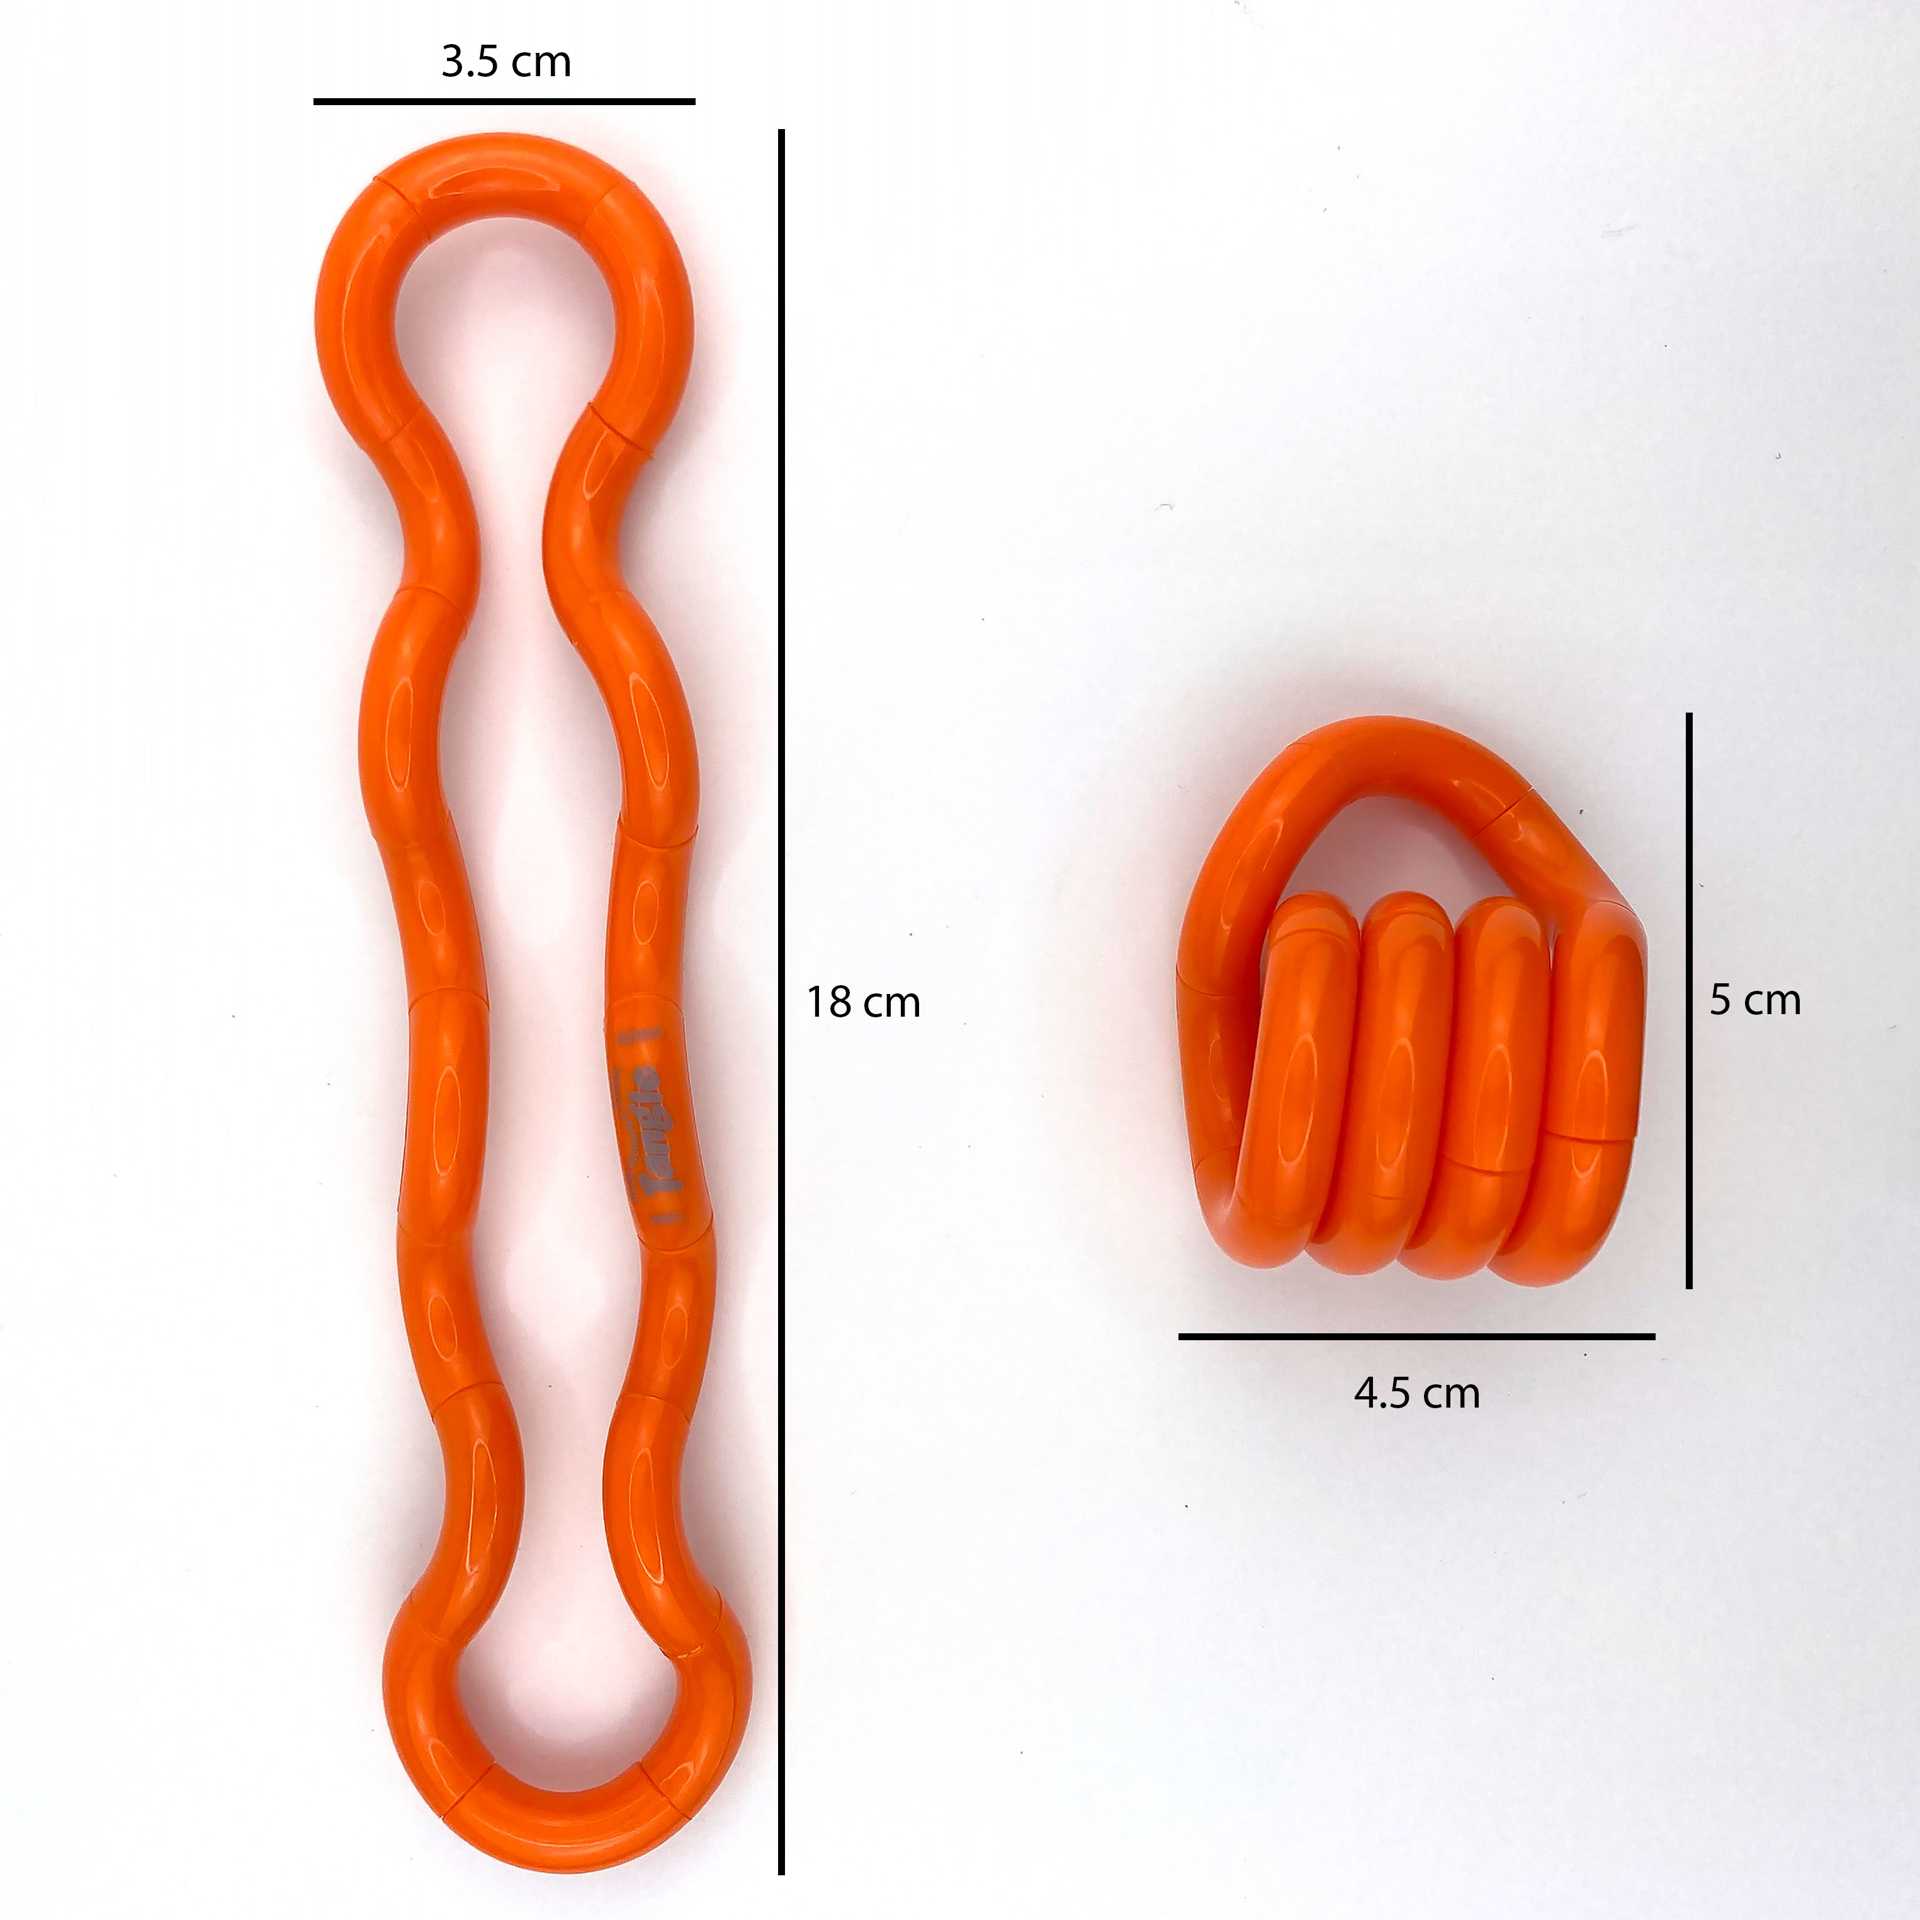 solid orange tangle with measurements